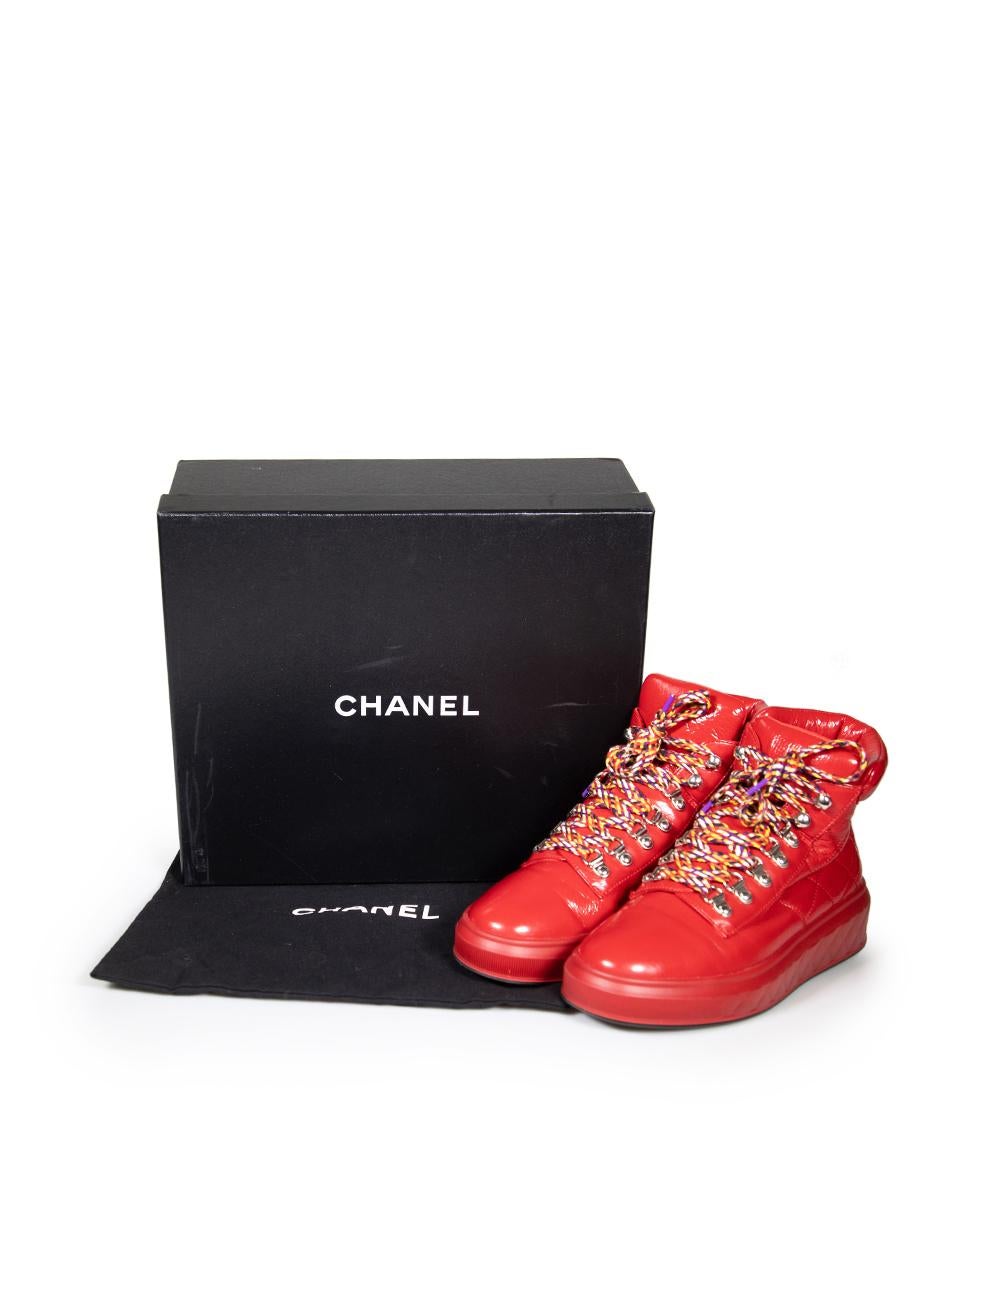 Chanel Red Patent Leather Padded Trainers Size IT 38.5 For Sale 2